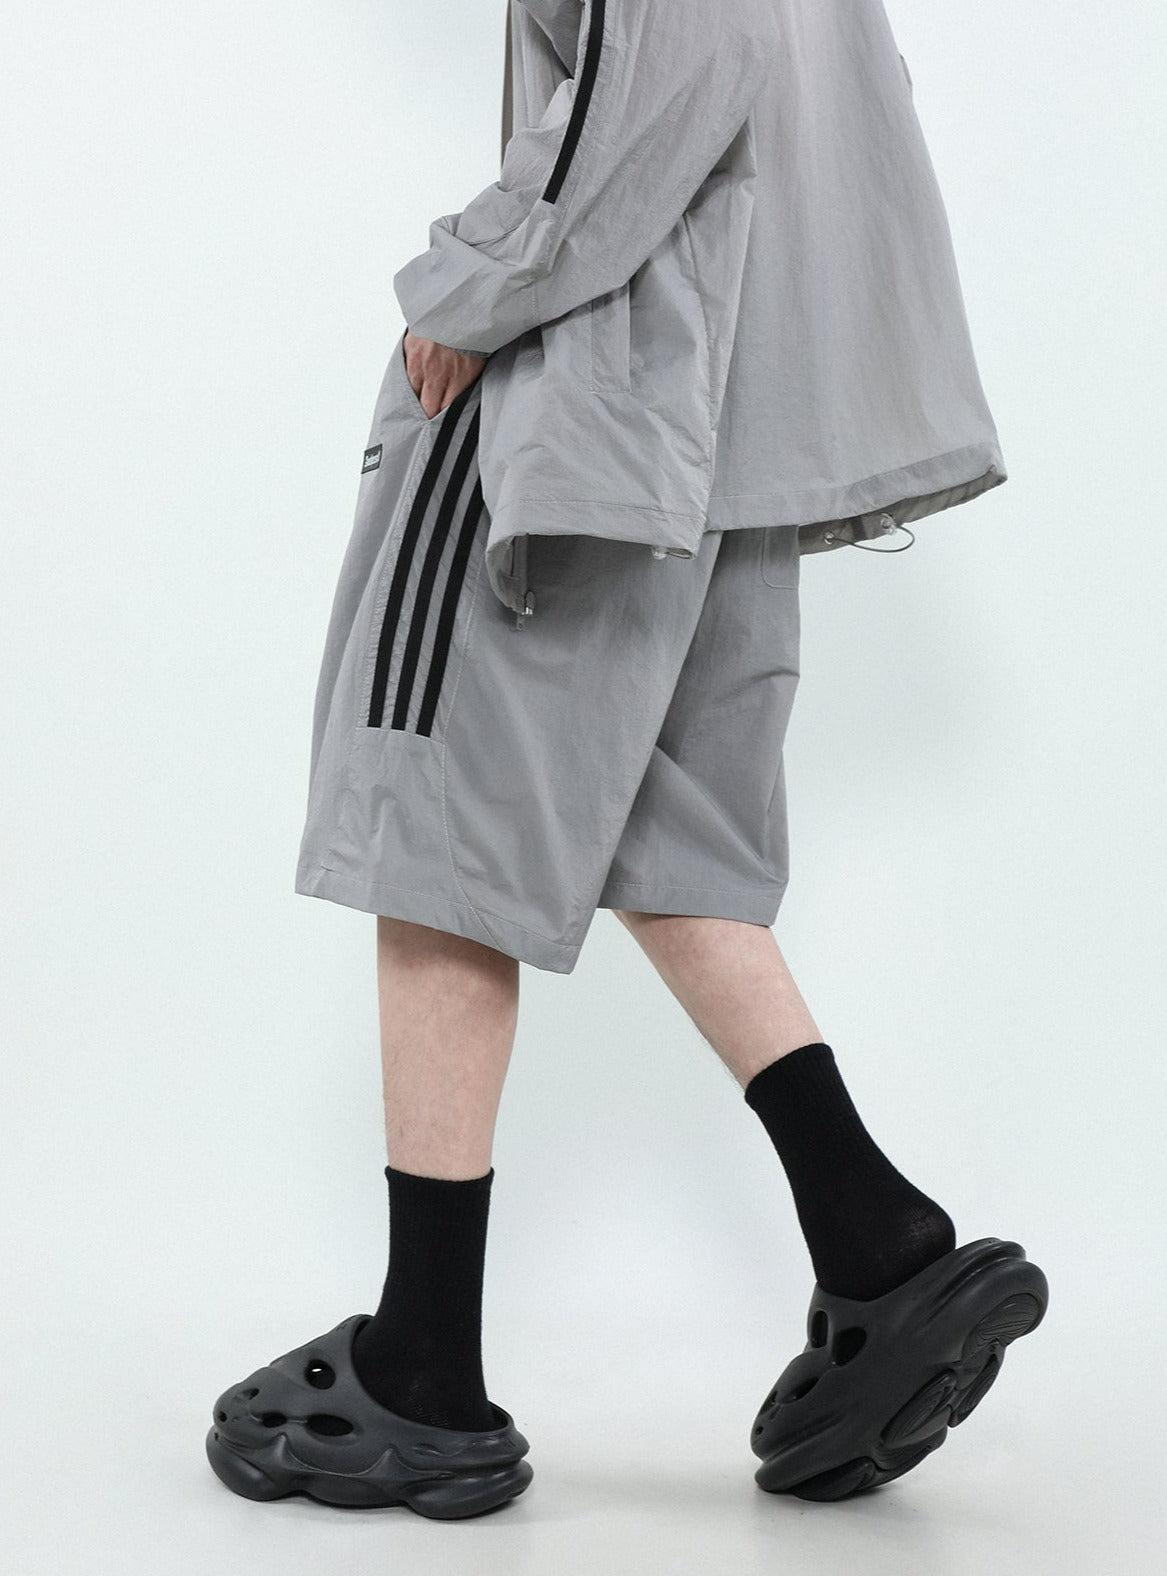 Retro Side Striped Sports Shorts Korean Street Fashion Shorts By Mr Nearly Shop Online at OH Vault